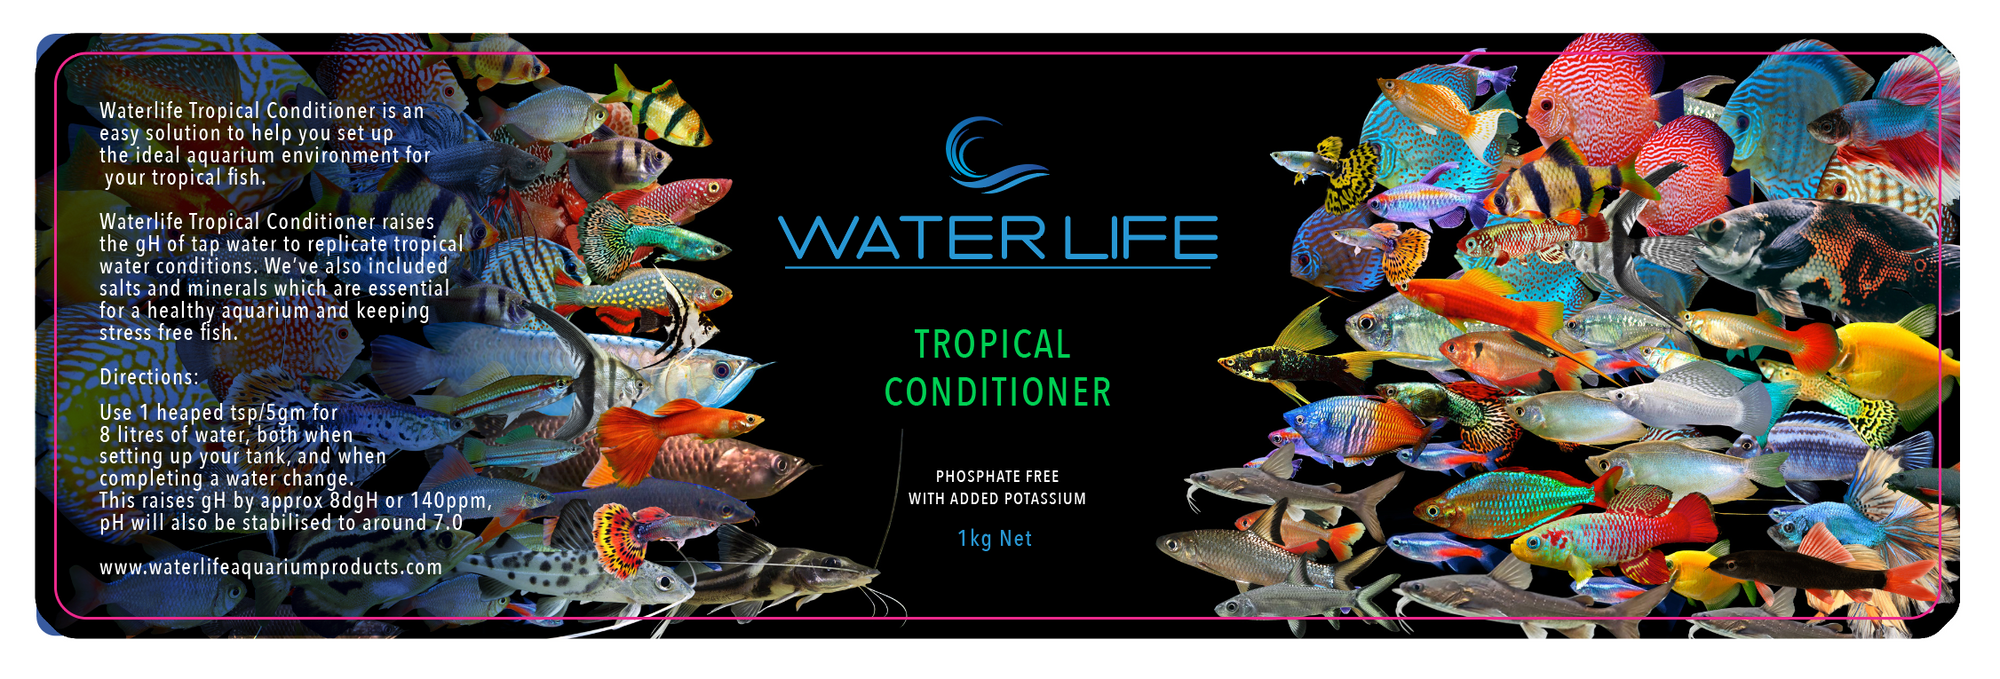 Waterlife Tropical Conditioner 500g